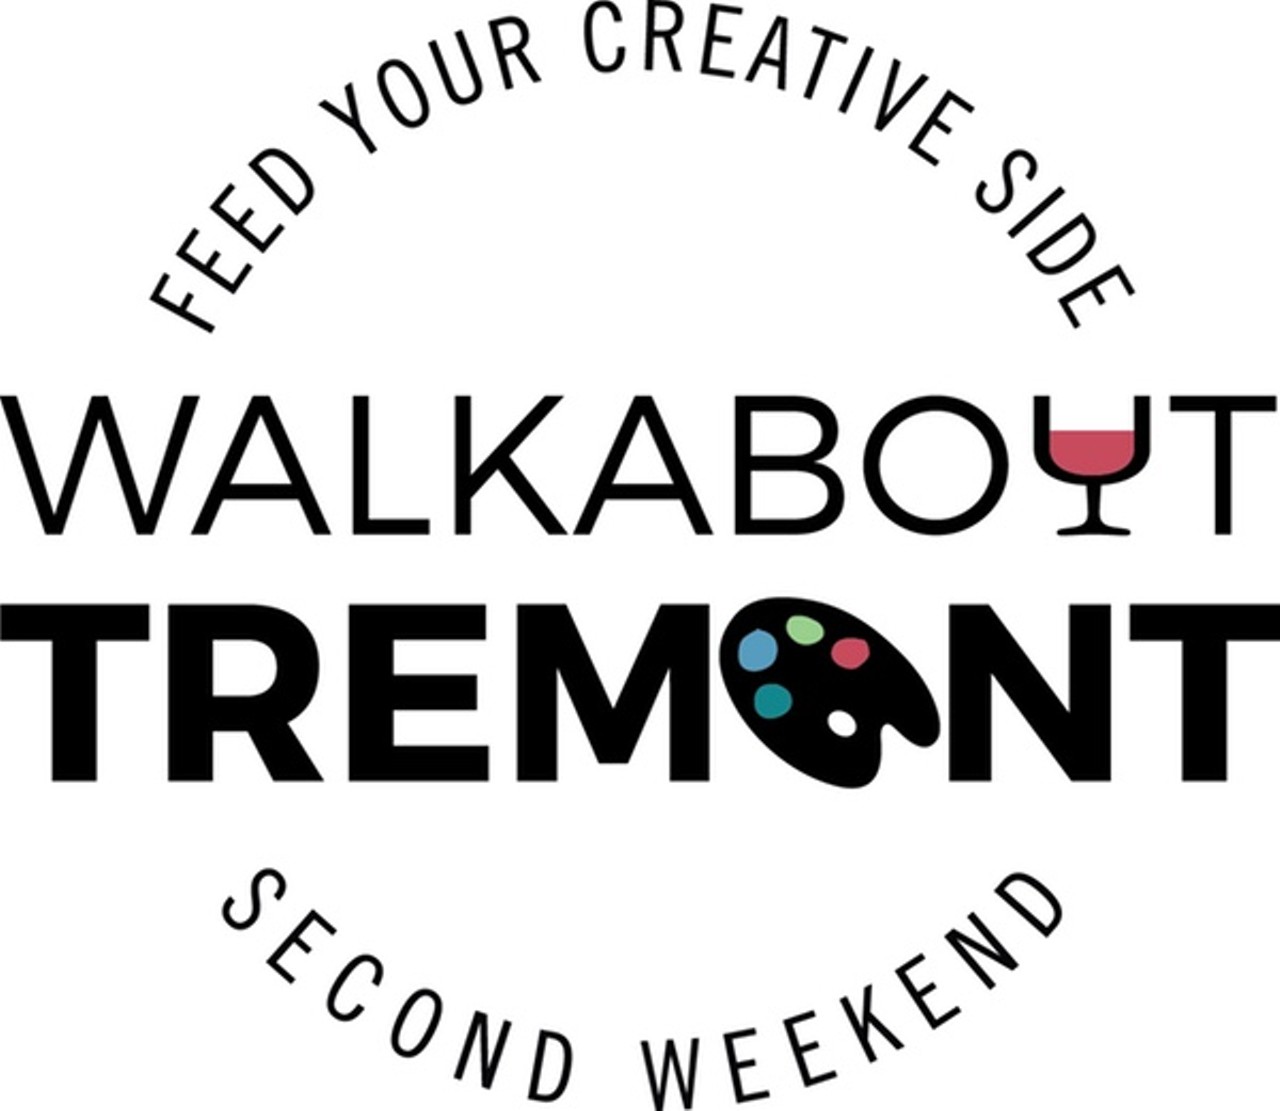 Walkabout Tremont 
When: Fri., Nov. 11
November&#146;s Walkabout Tremont is branded as &#147;The return of the art openings.&#148; Although, there aren&#146;t any new galleries opening, organizers promise plenty of art around town. During this month&#146;s Walkabout, stop by House Gallery, Mastroianni Arts, Doubting Thomas, Calicchia Studios, Rob Hartshorn Studio & Gallery and more. Of course, there&#146;s also plenty of bars, restaurants and specialty shops in the neighborhood. Walkabout Tremont takes place from 6 to 9 tonight and continues all day Saturday. Free.